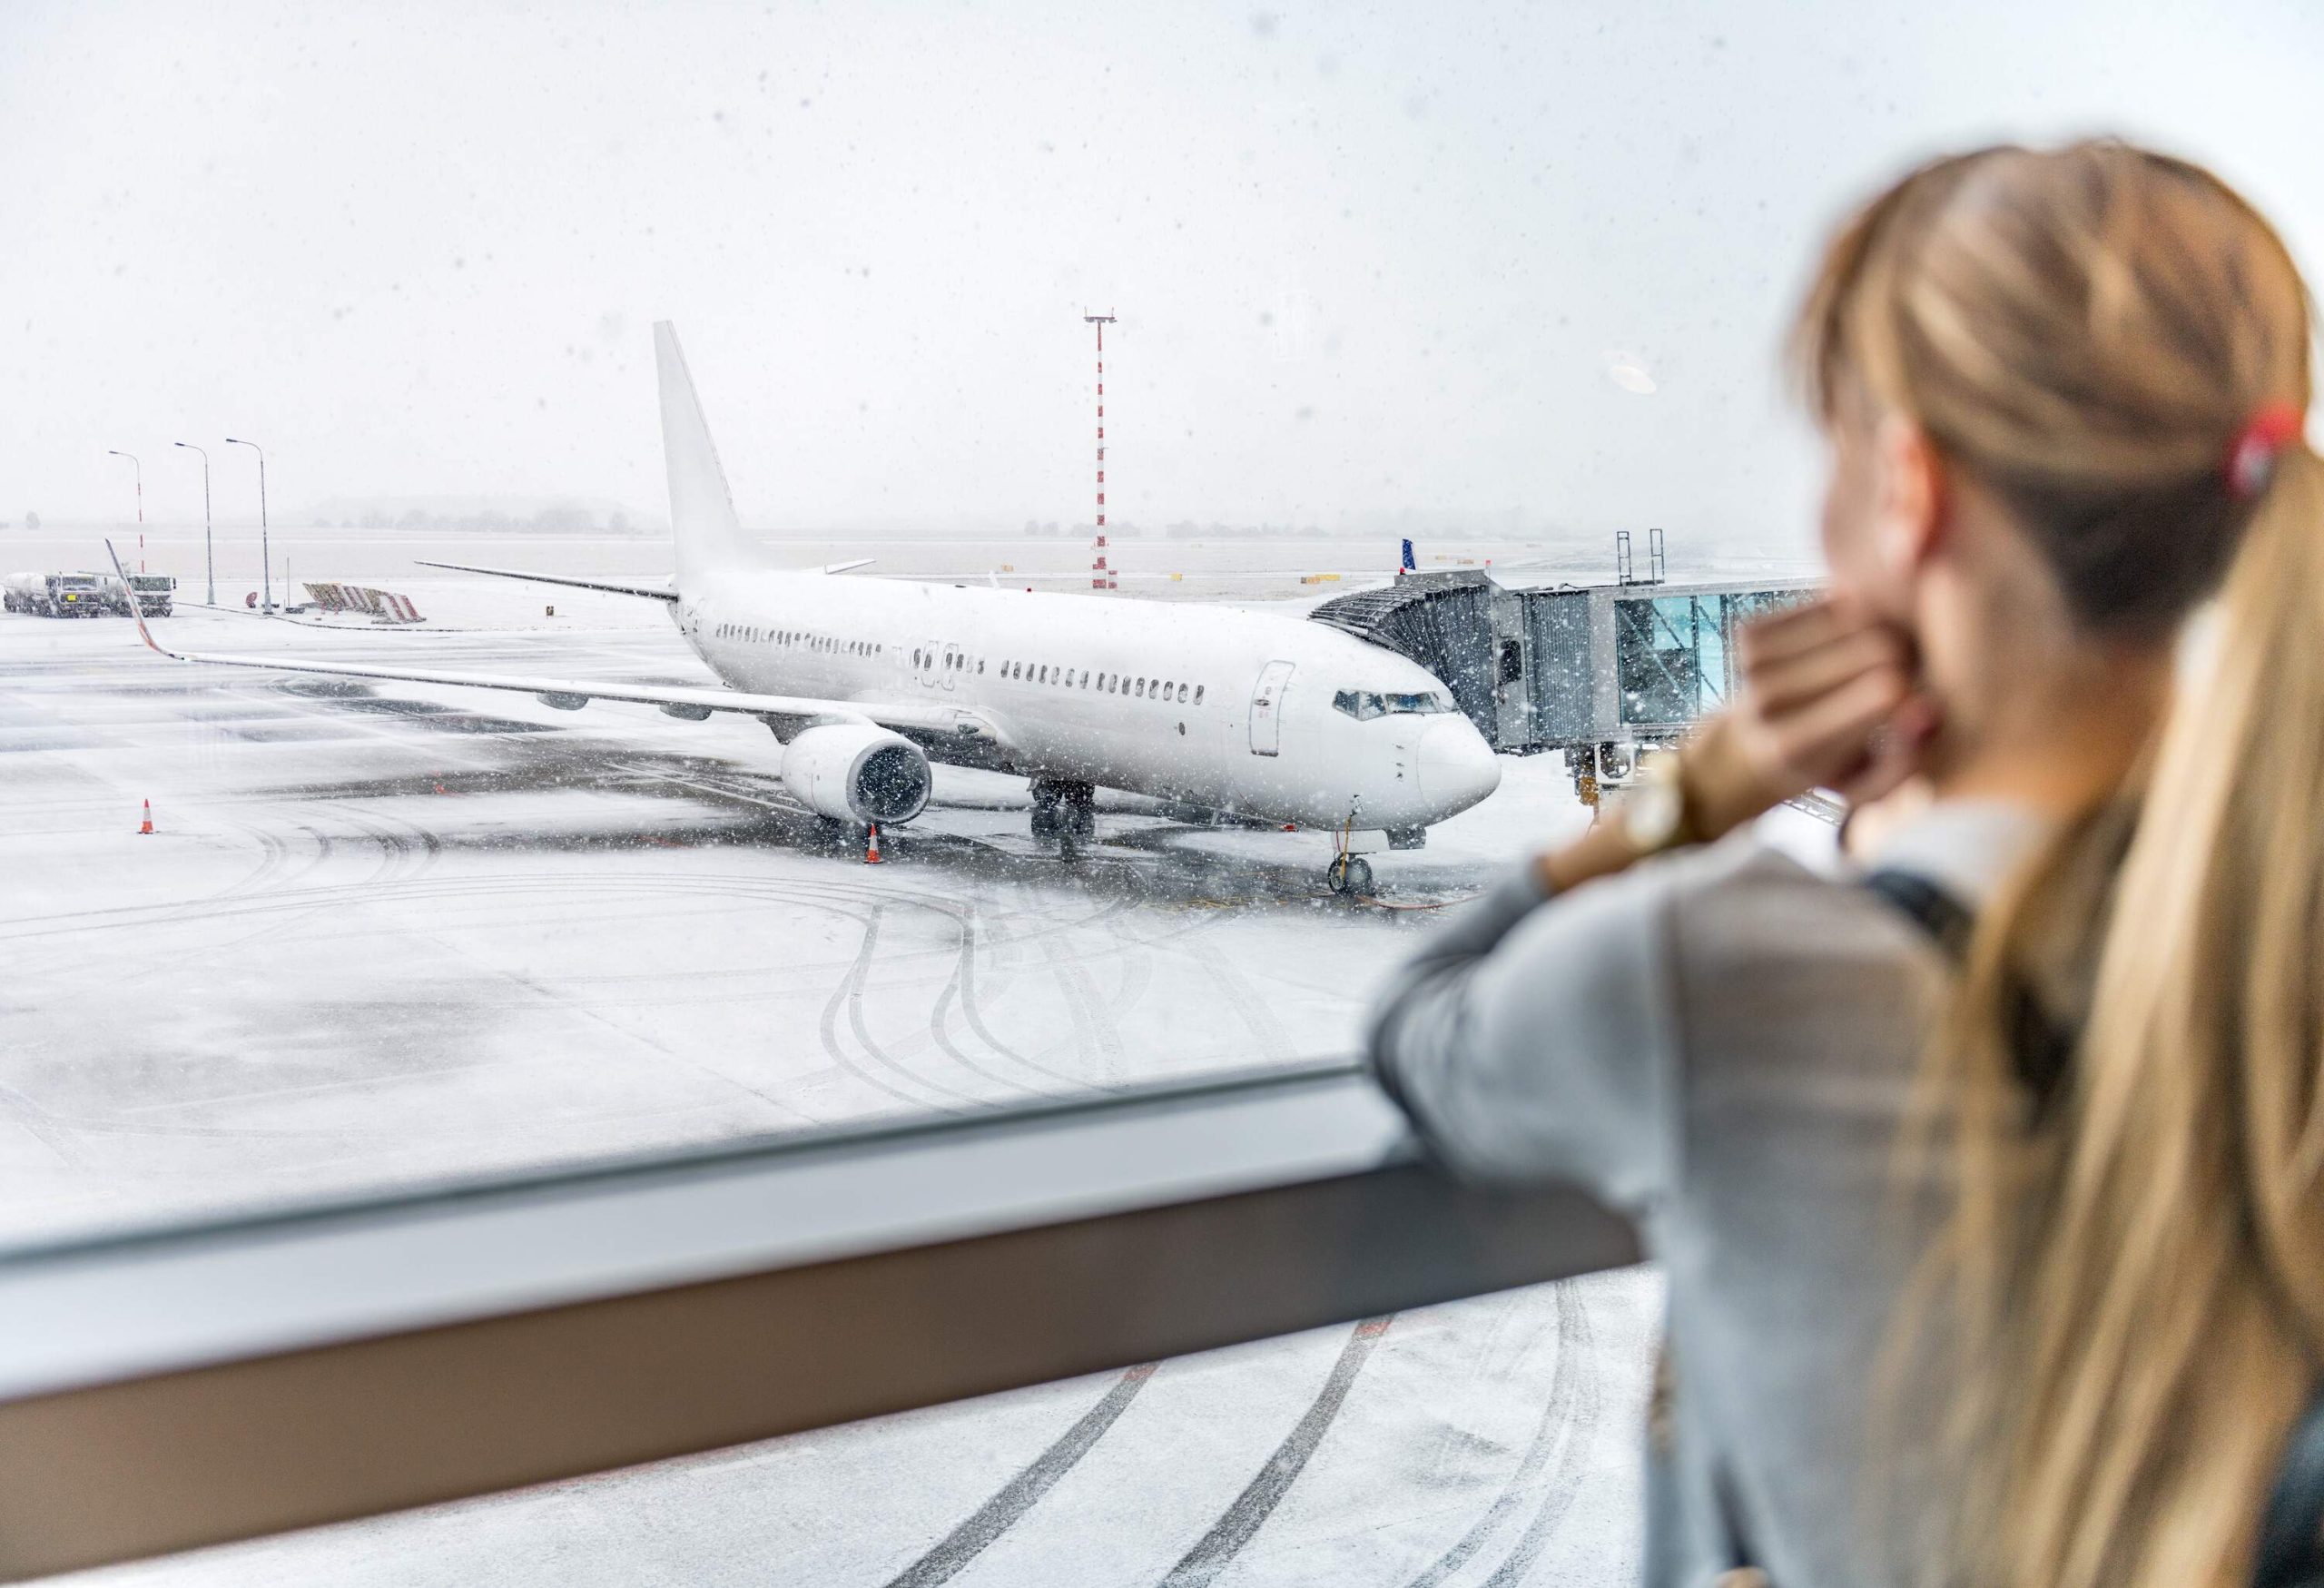 A woman looking at a large aircraft on the tarmac through the glass windows of the terminal.